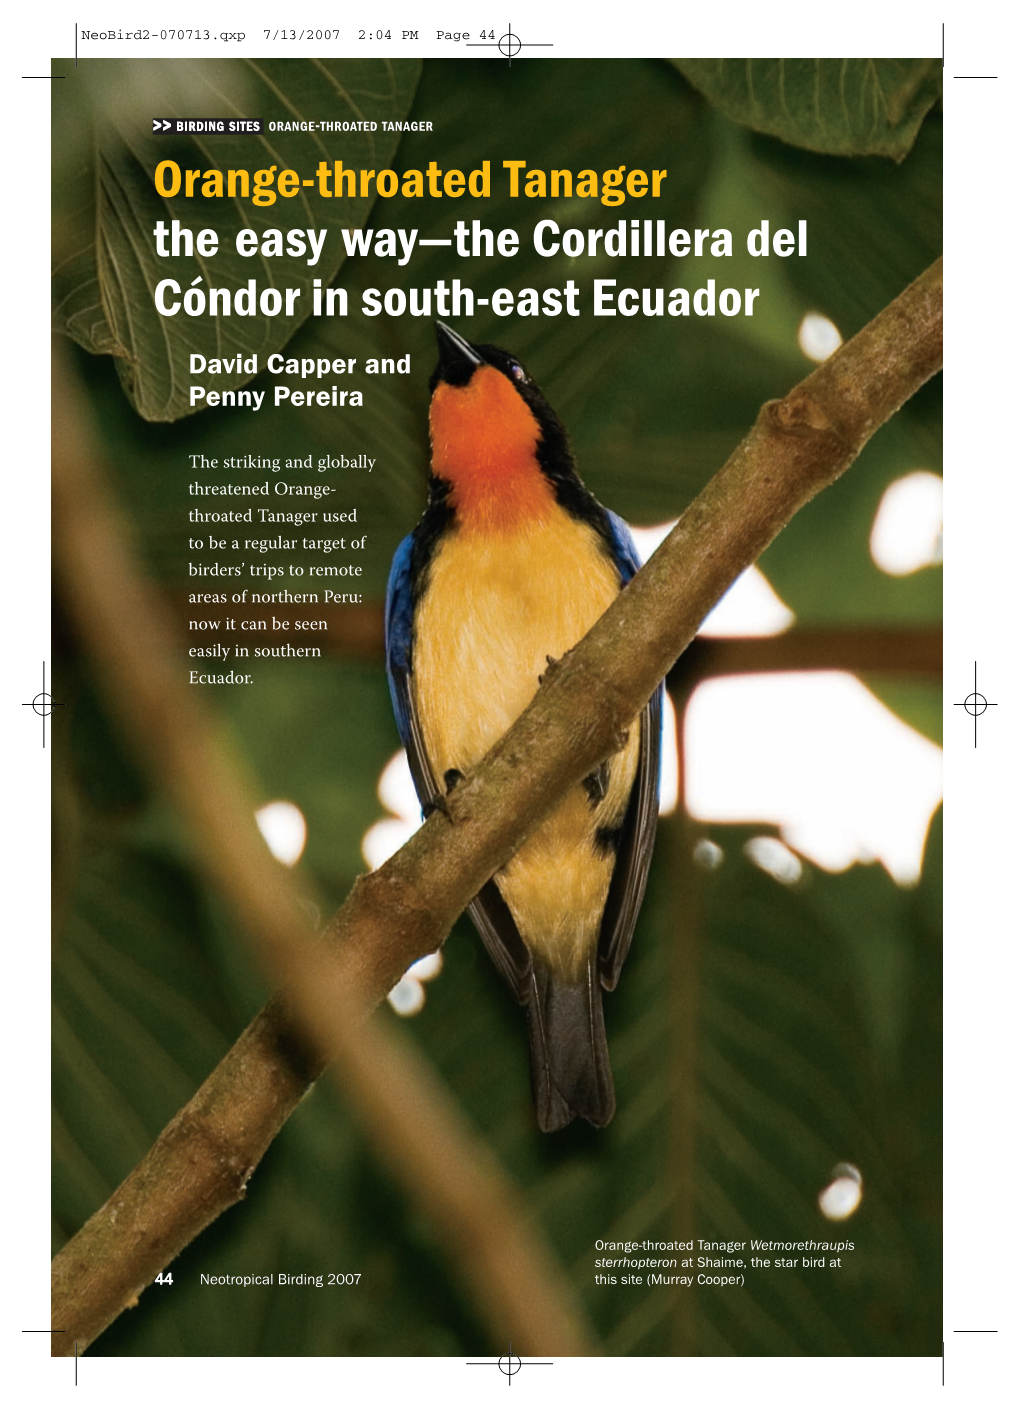 Orange-Throated Tanager the Easy Way—The Cordillera Del Cóndor in South-East Ecuador David Capper and Penny Pereira